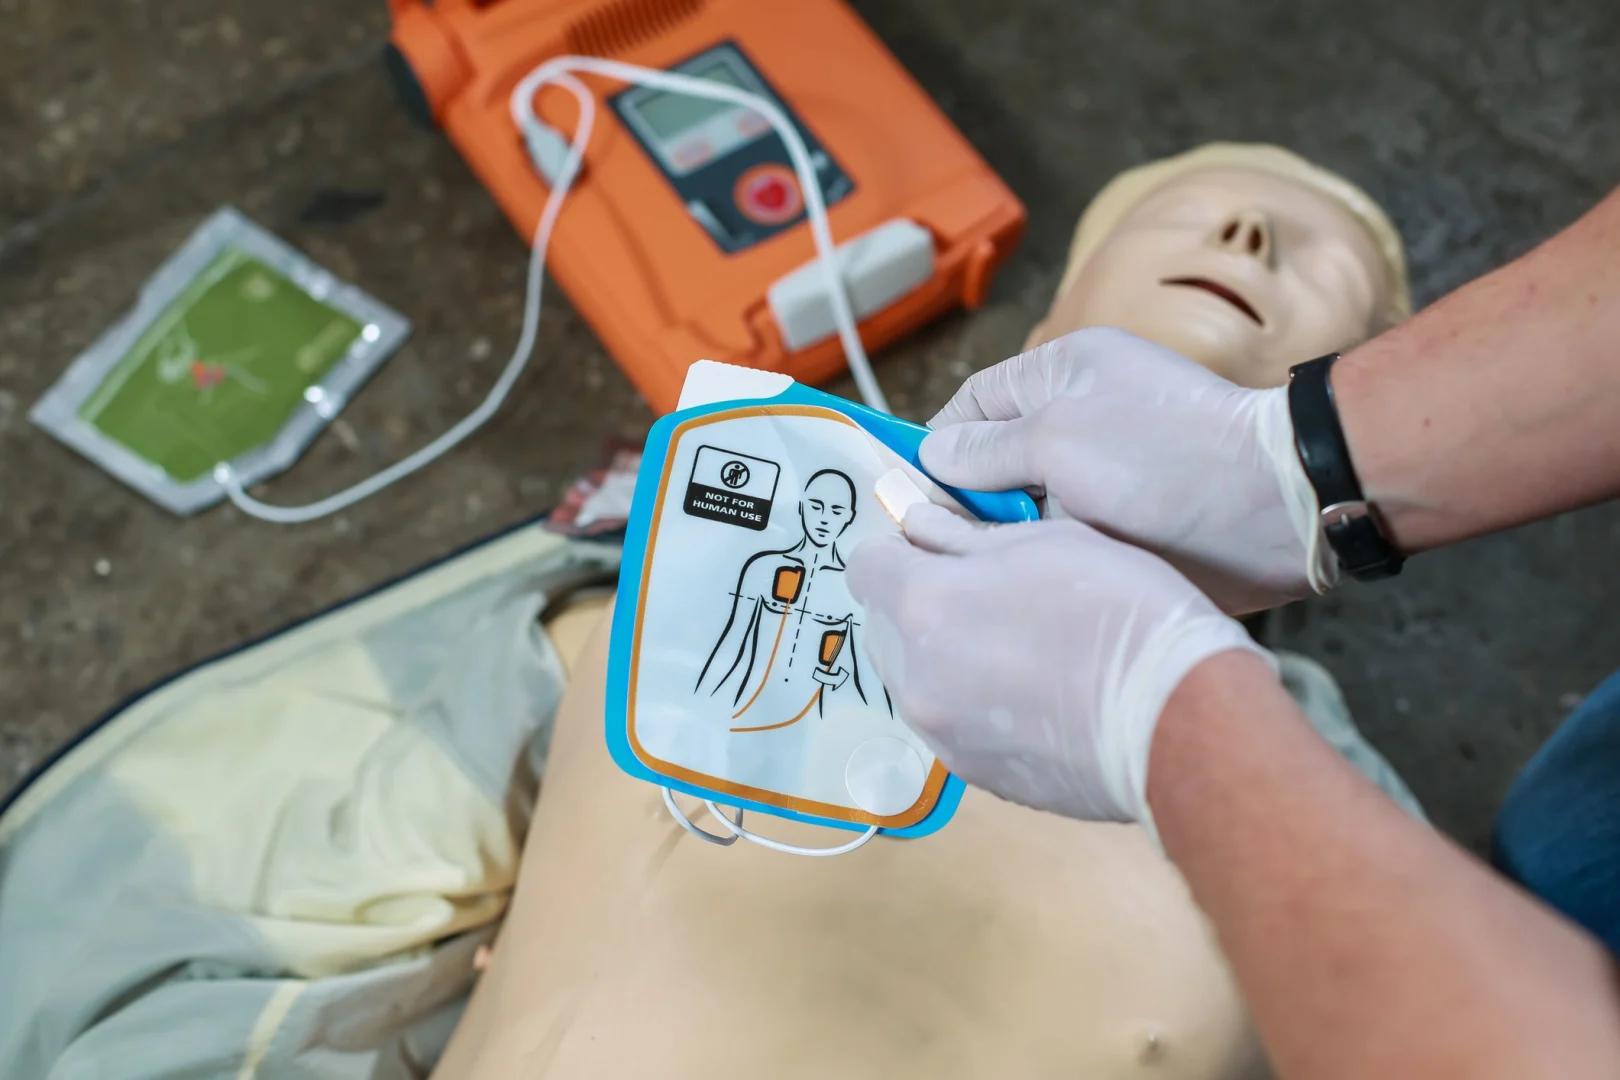 Israel Education Ministry ordered 1,556 defibrillators installed in all schools with over 500 children in preparation for children's vaccine campaign